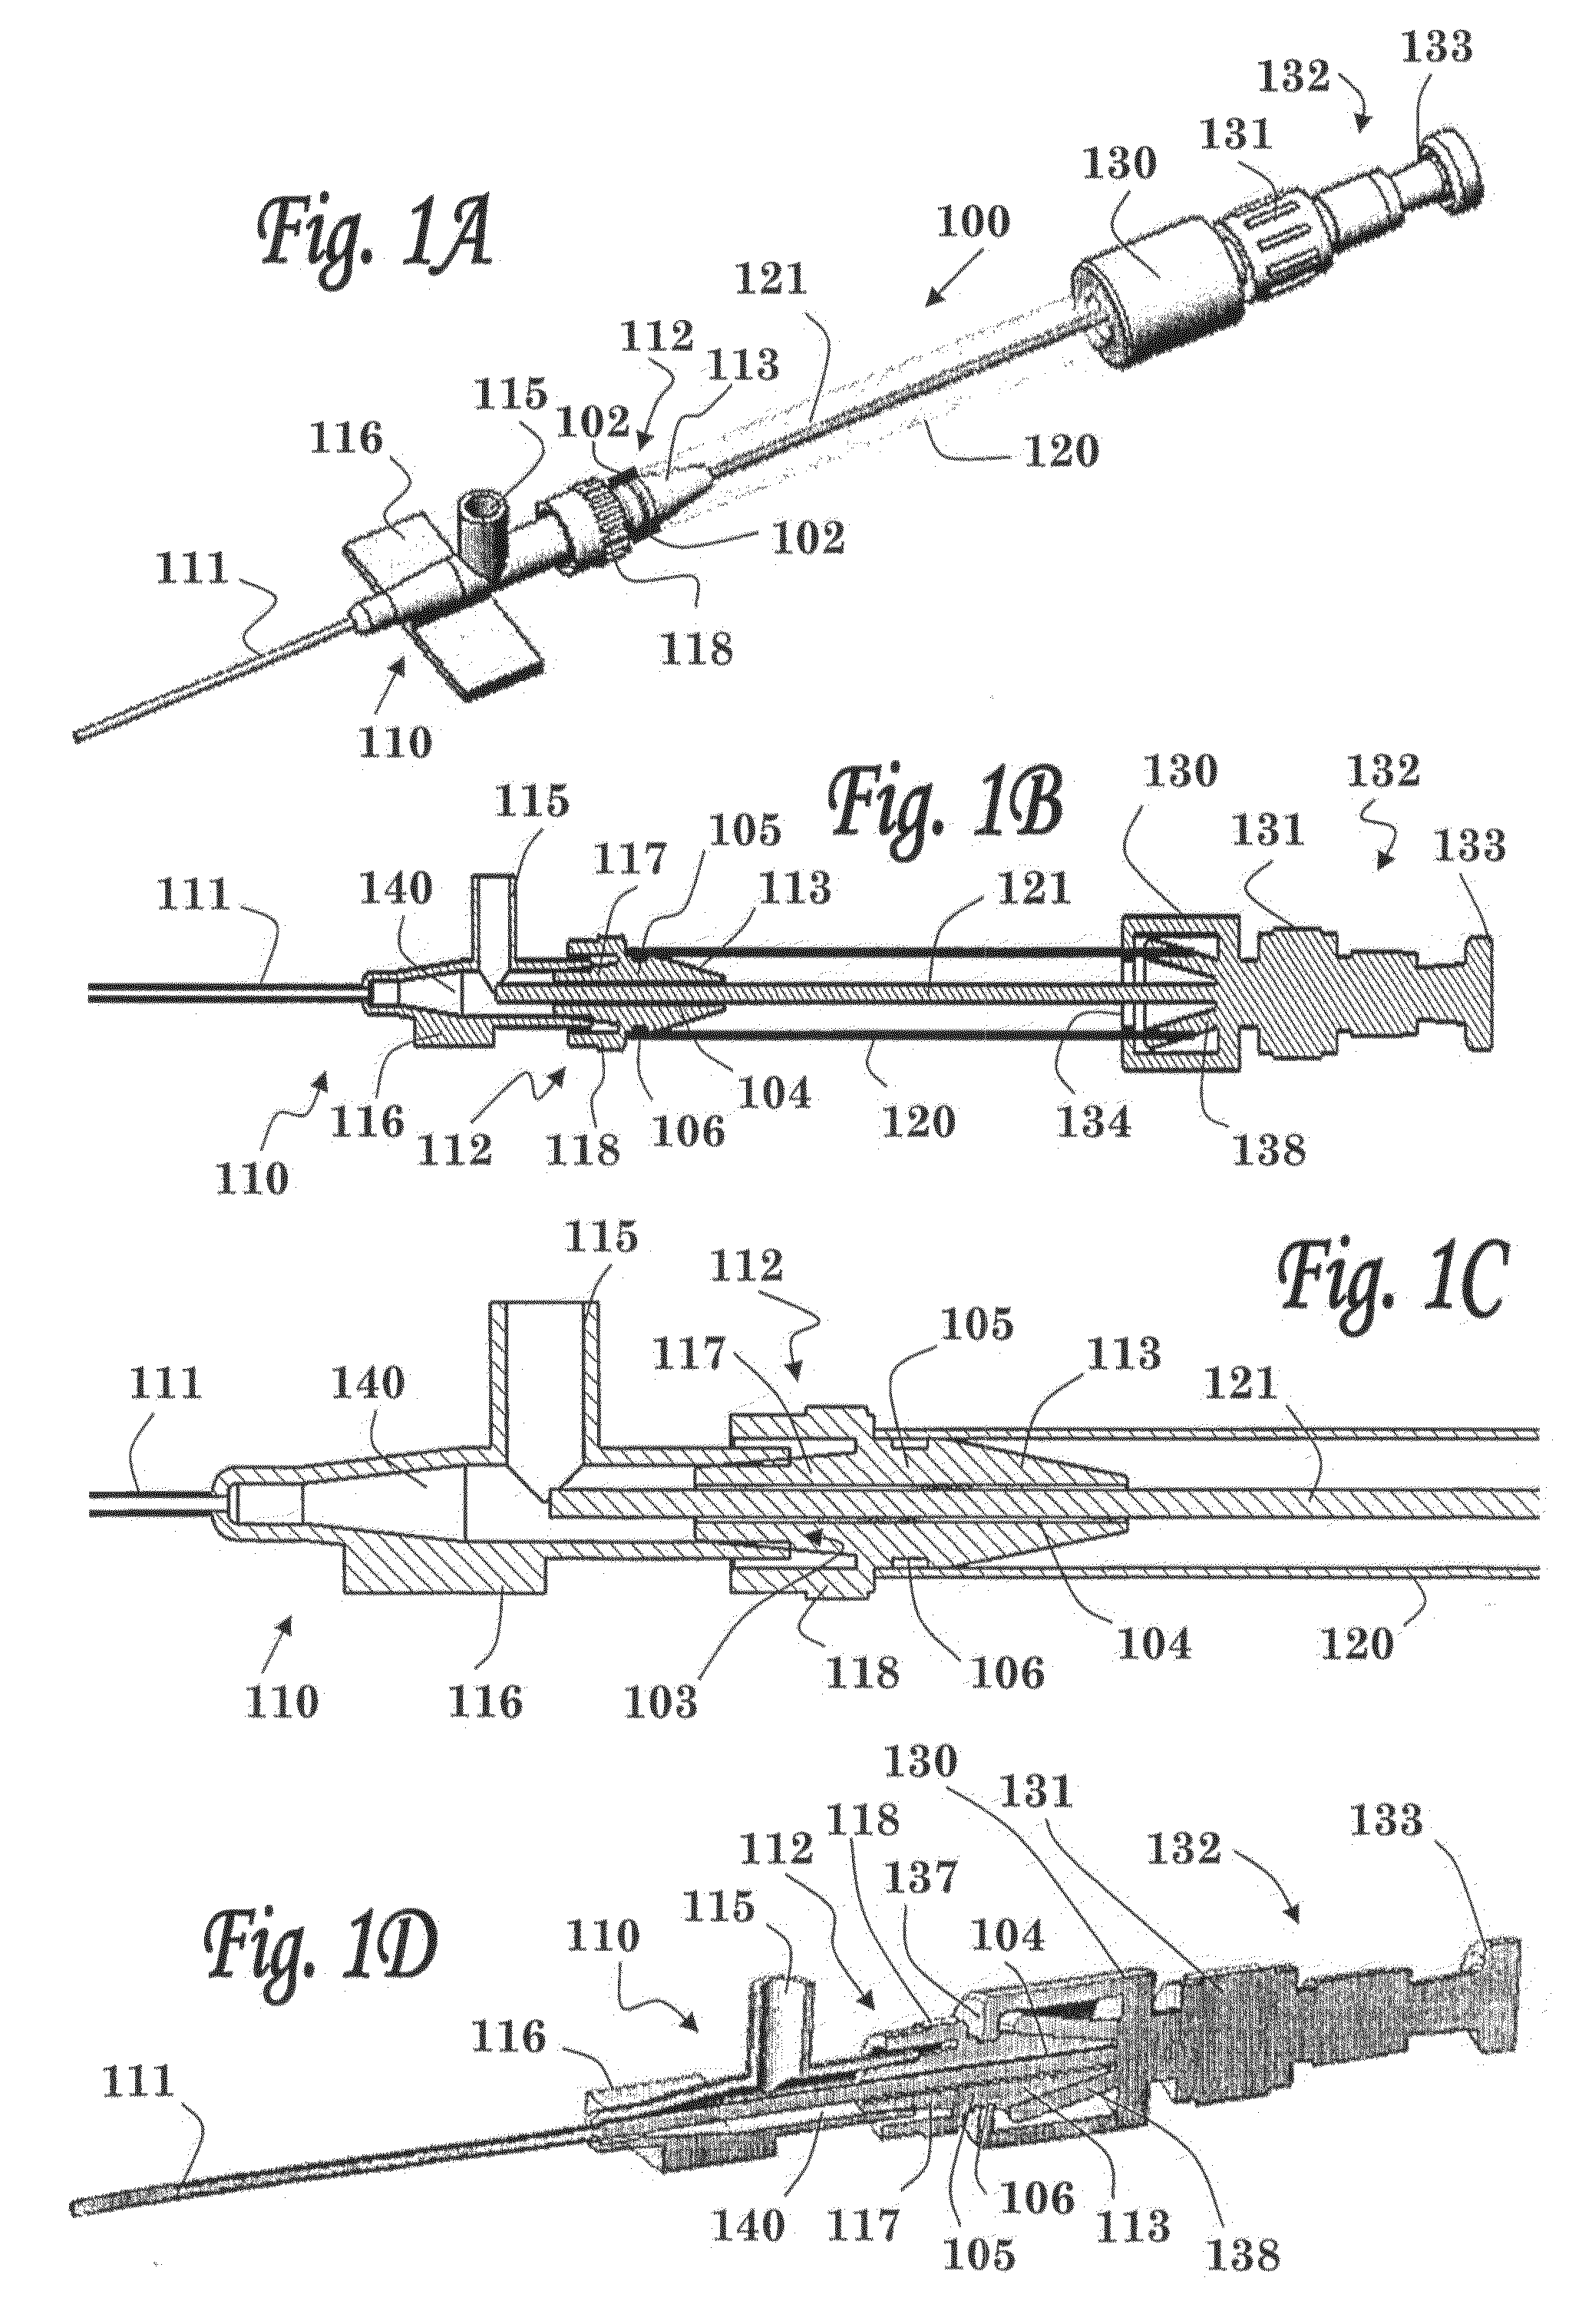 Method and Apparatus for Inserting a Catheter Device